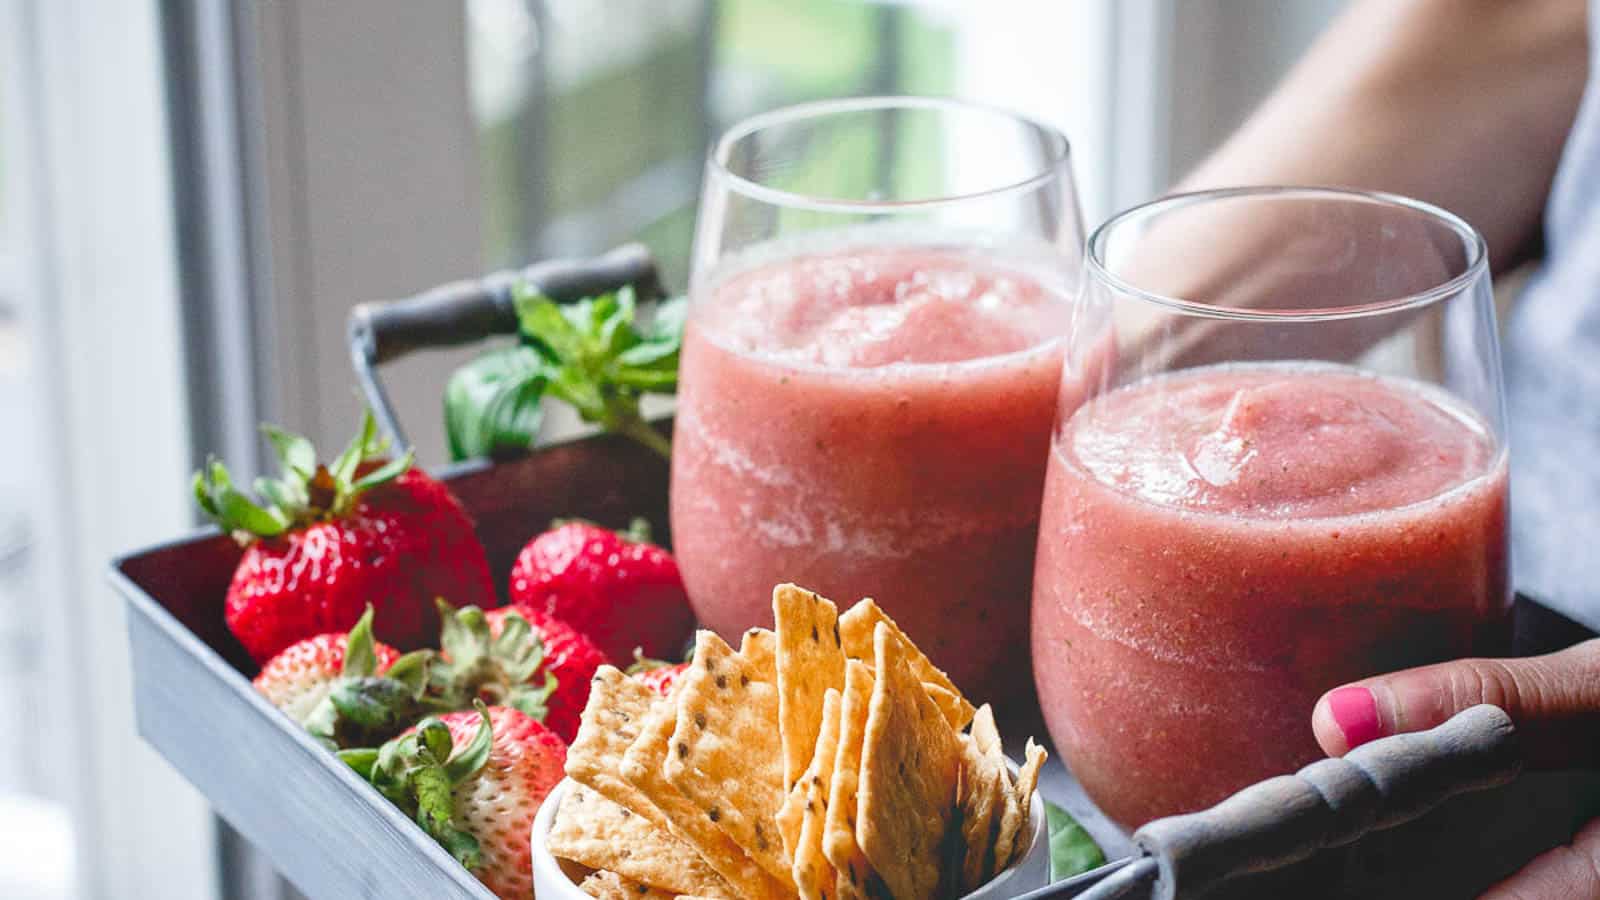 Strawberry slushies on a tray with fresh strawberries and crackers.